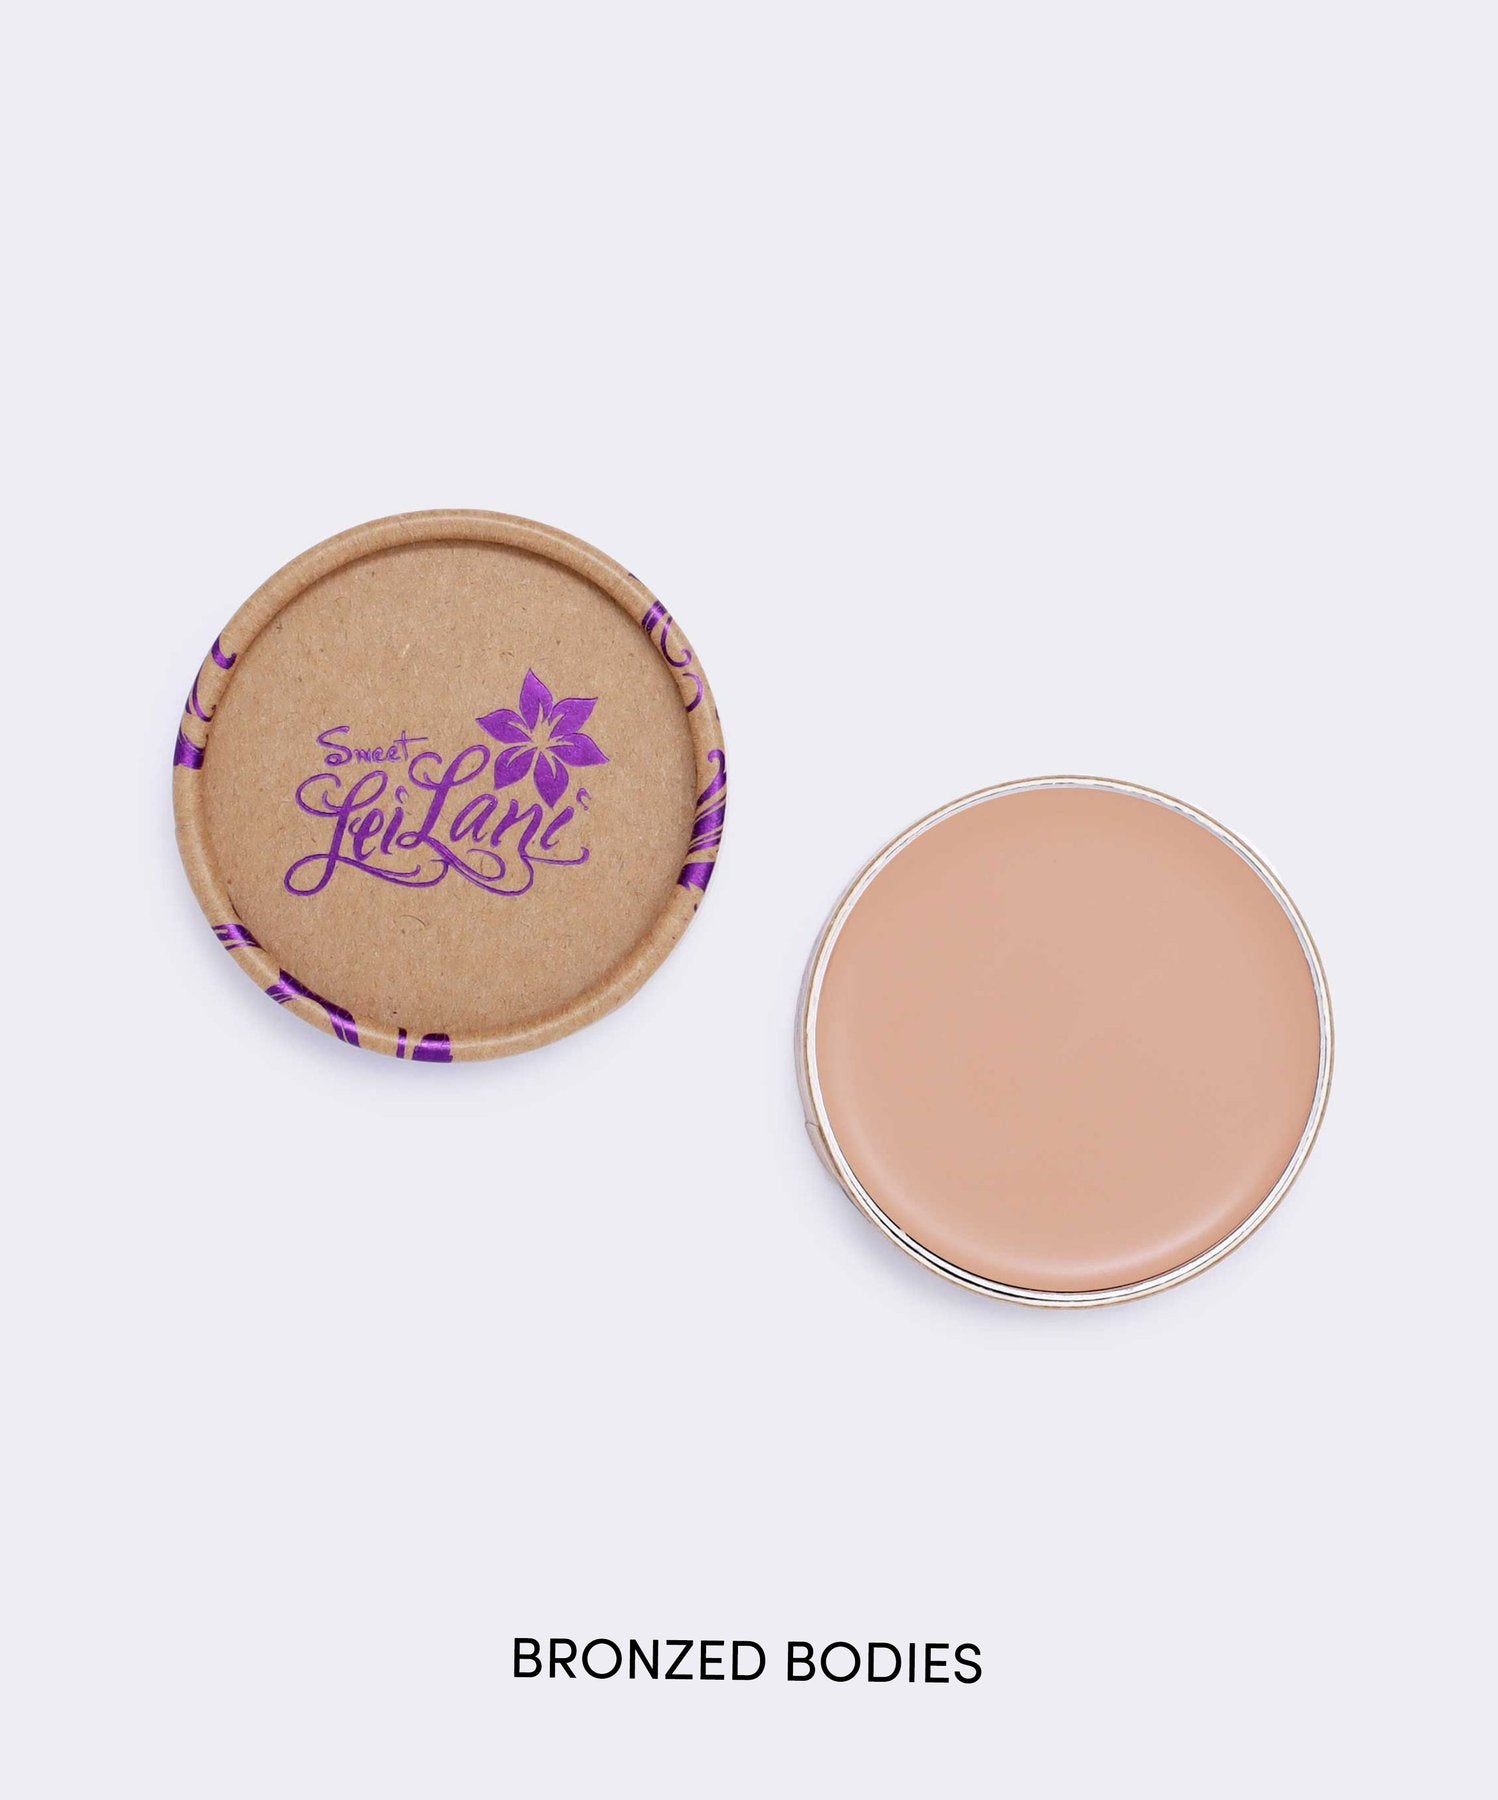 Sweet Leilani Cover Foundation